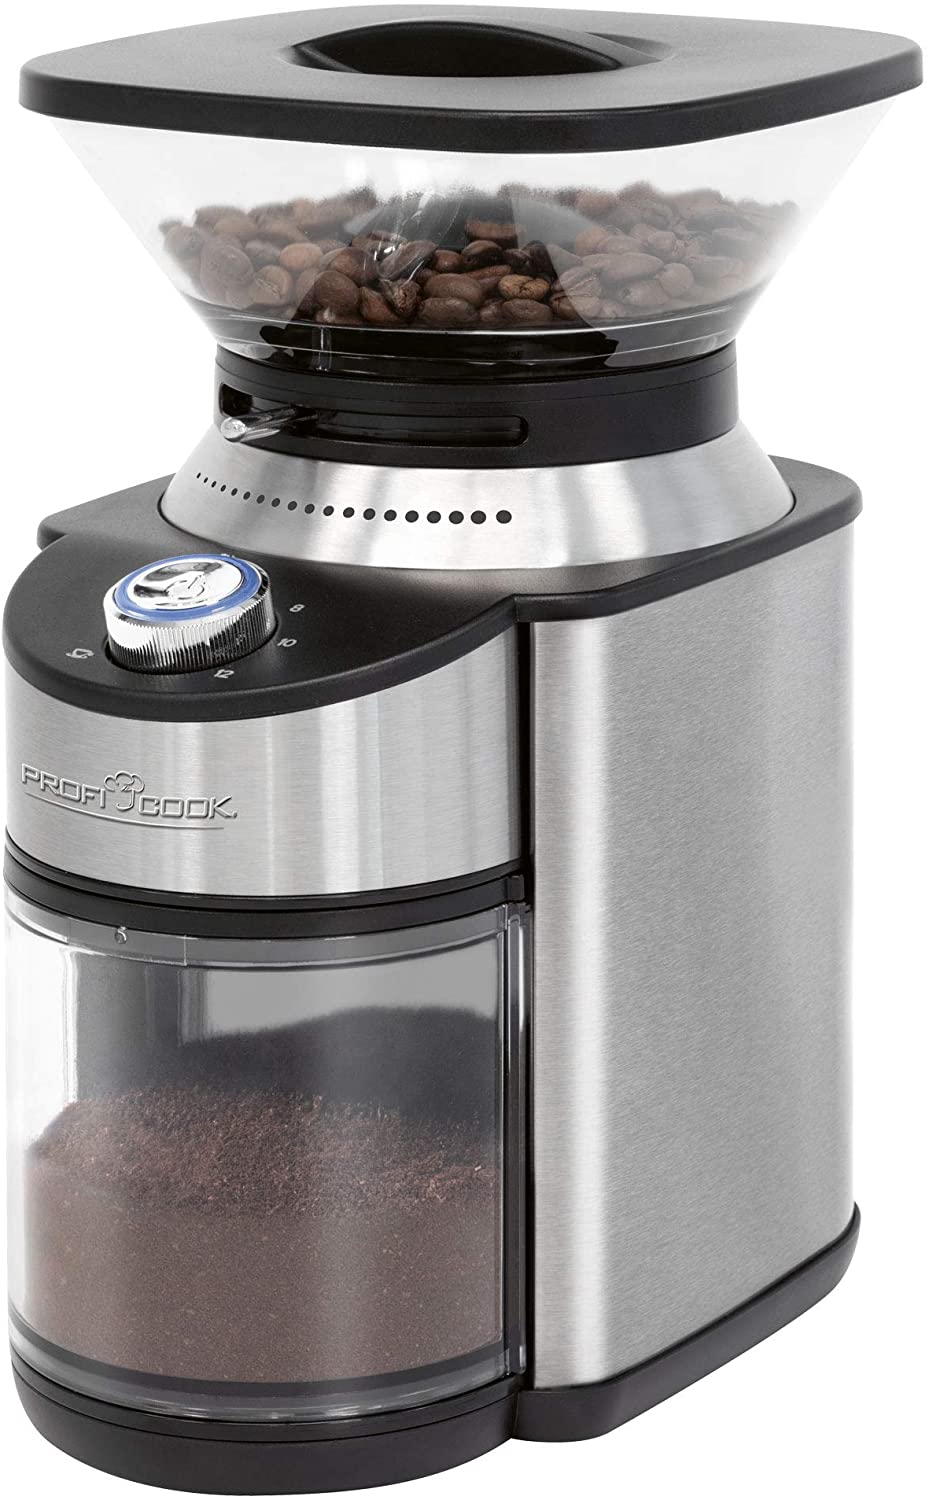 ProfiCook PC-EKM 1205 Electric Coffee Grinder, Coffee Grinder, Adjustable Grinding Level (Coarse to Extra Fine) for e.g. Filter or Filter Holder, Turkish Coffee, Mocha, Aroma Protective Lid, Stainless Steel